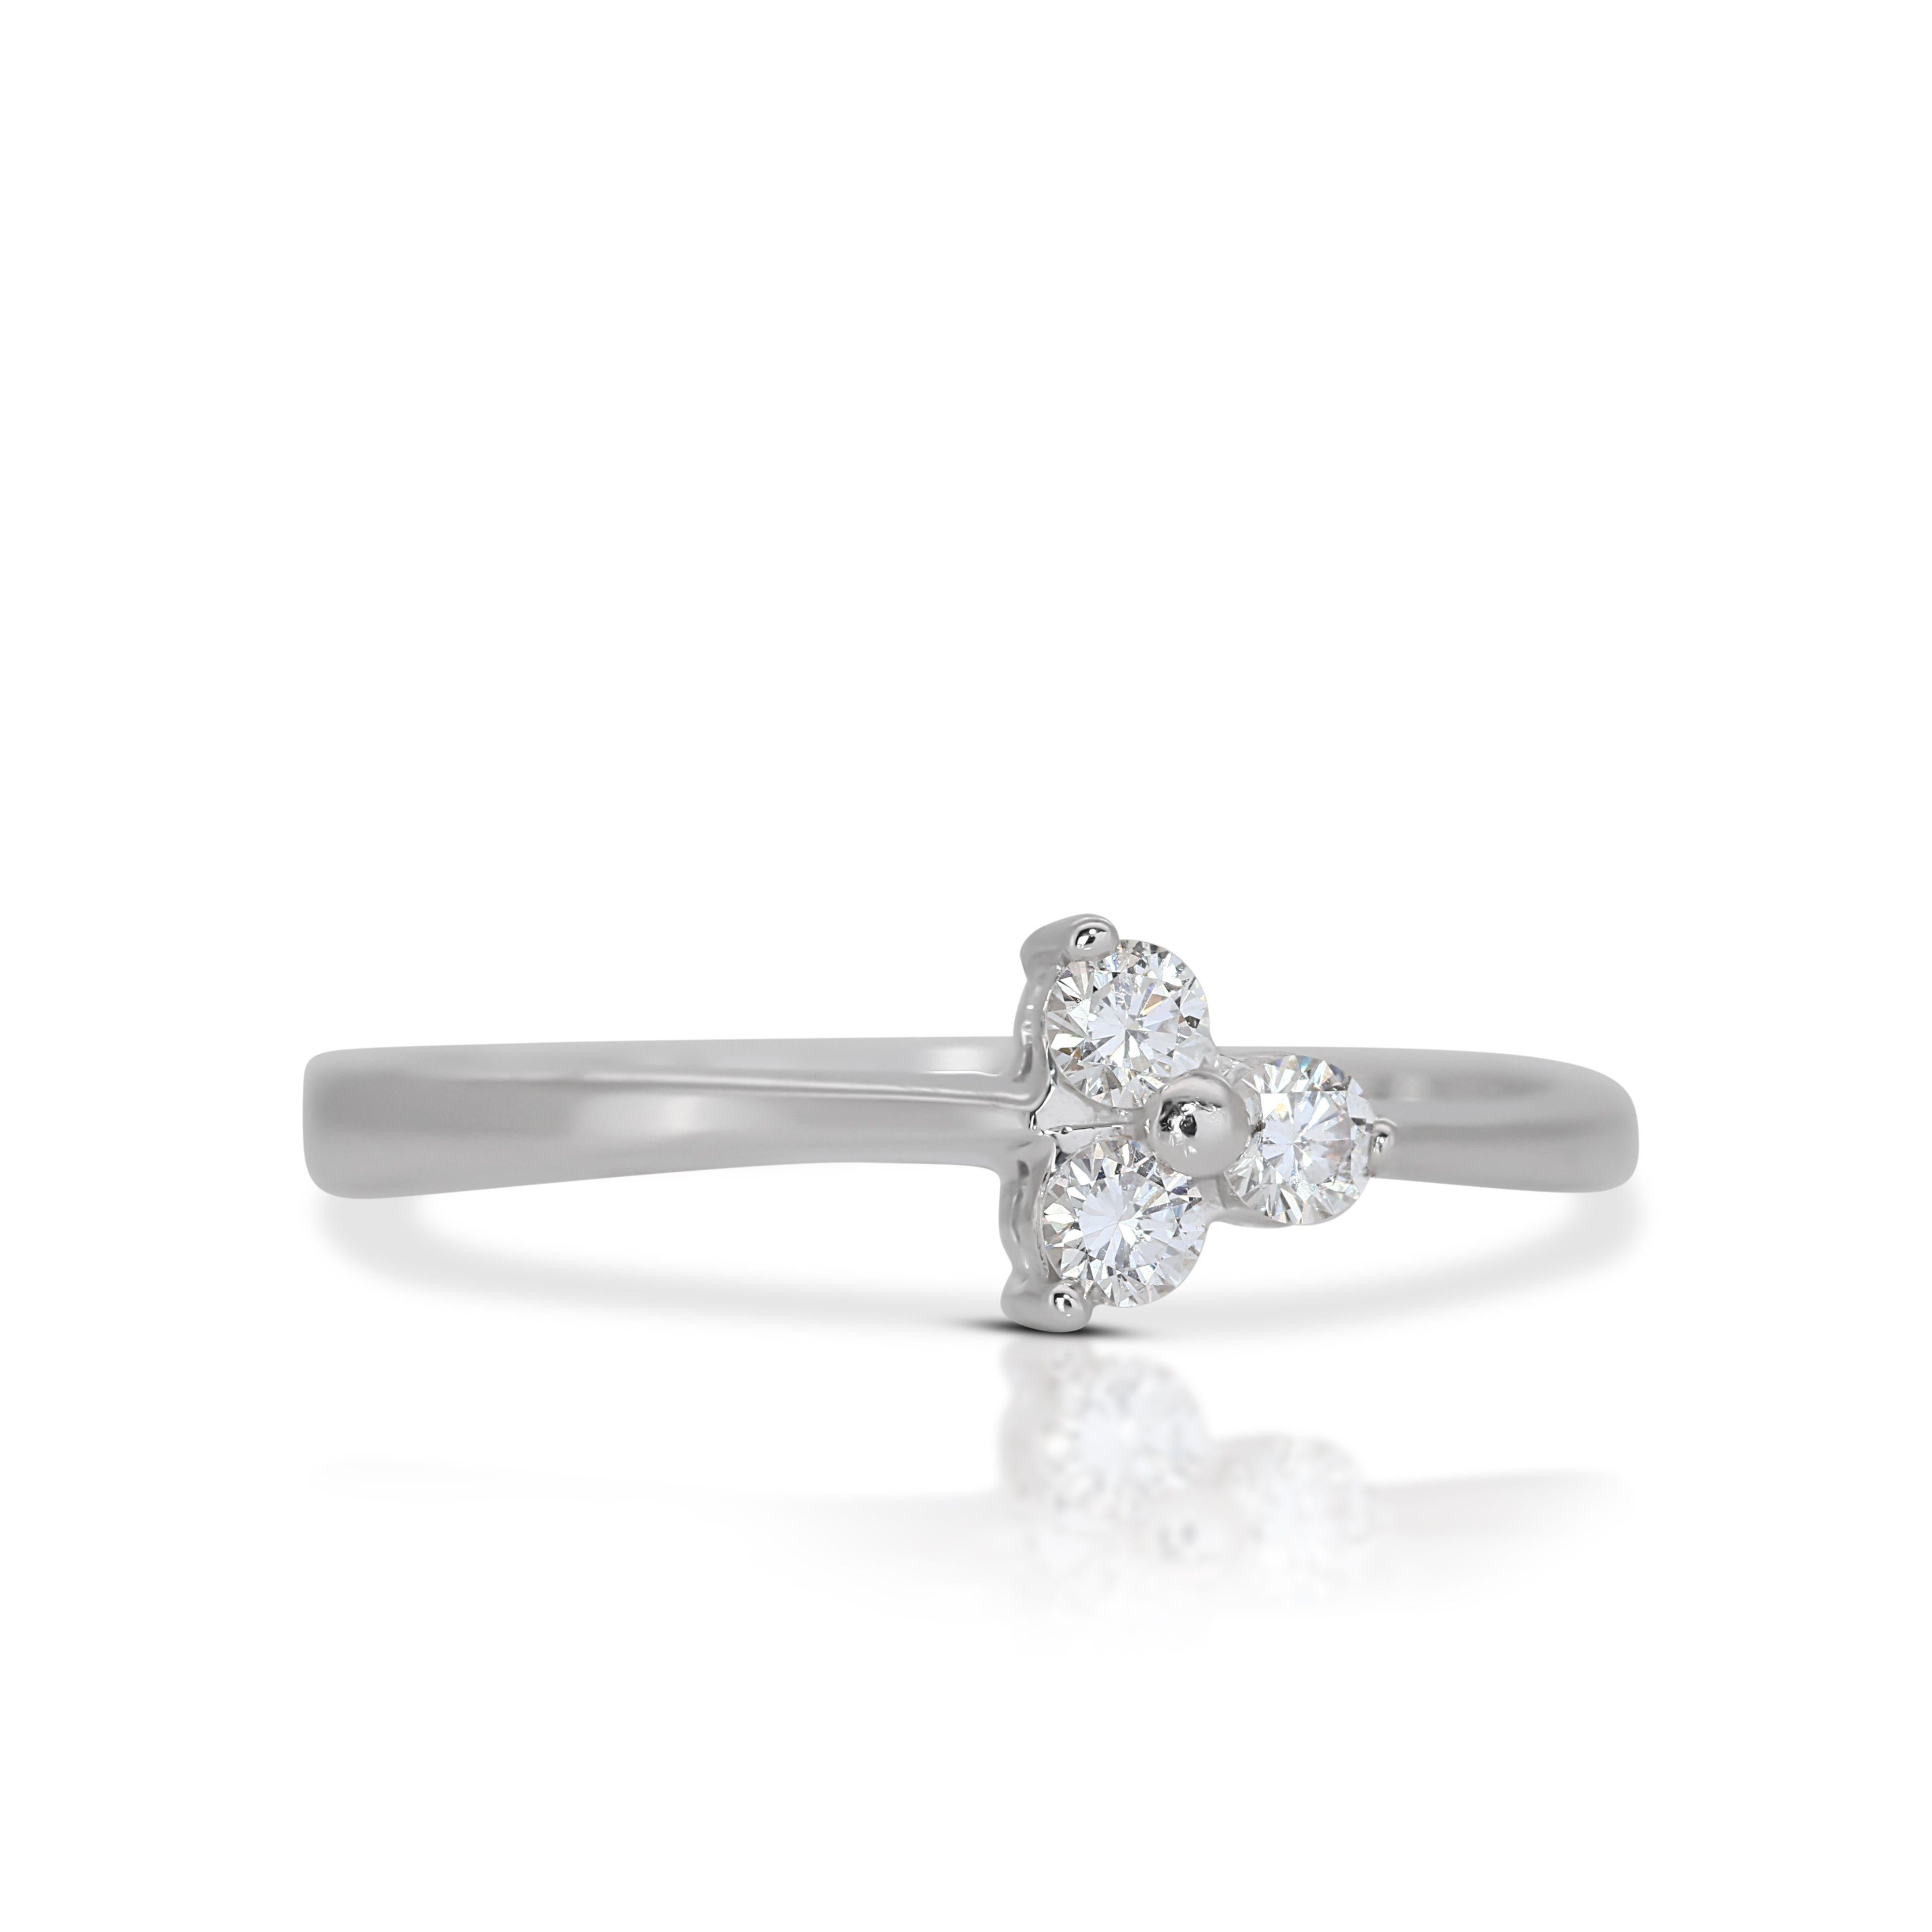 The centerpiece of this ring is a dazzling diamond, selected for its exceptional clarity and brilliance. The diamond is thoughtfully set within the leaf-shaped design, which symbolizes the beauty and resilience of nature. This design allows the